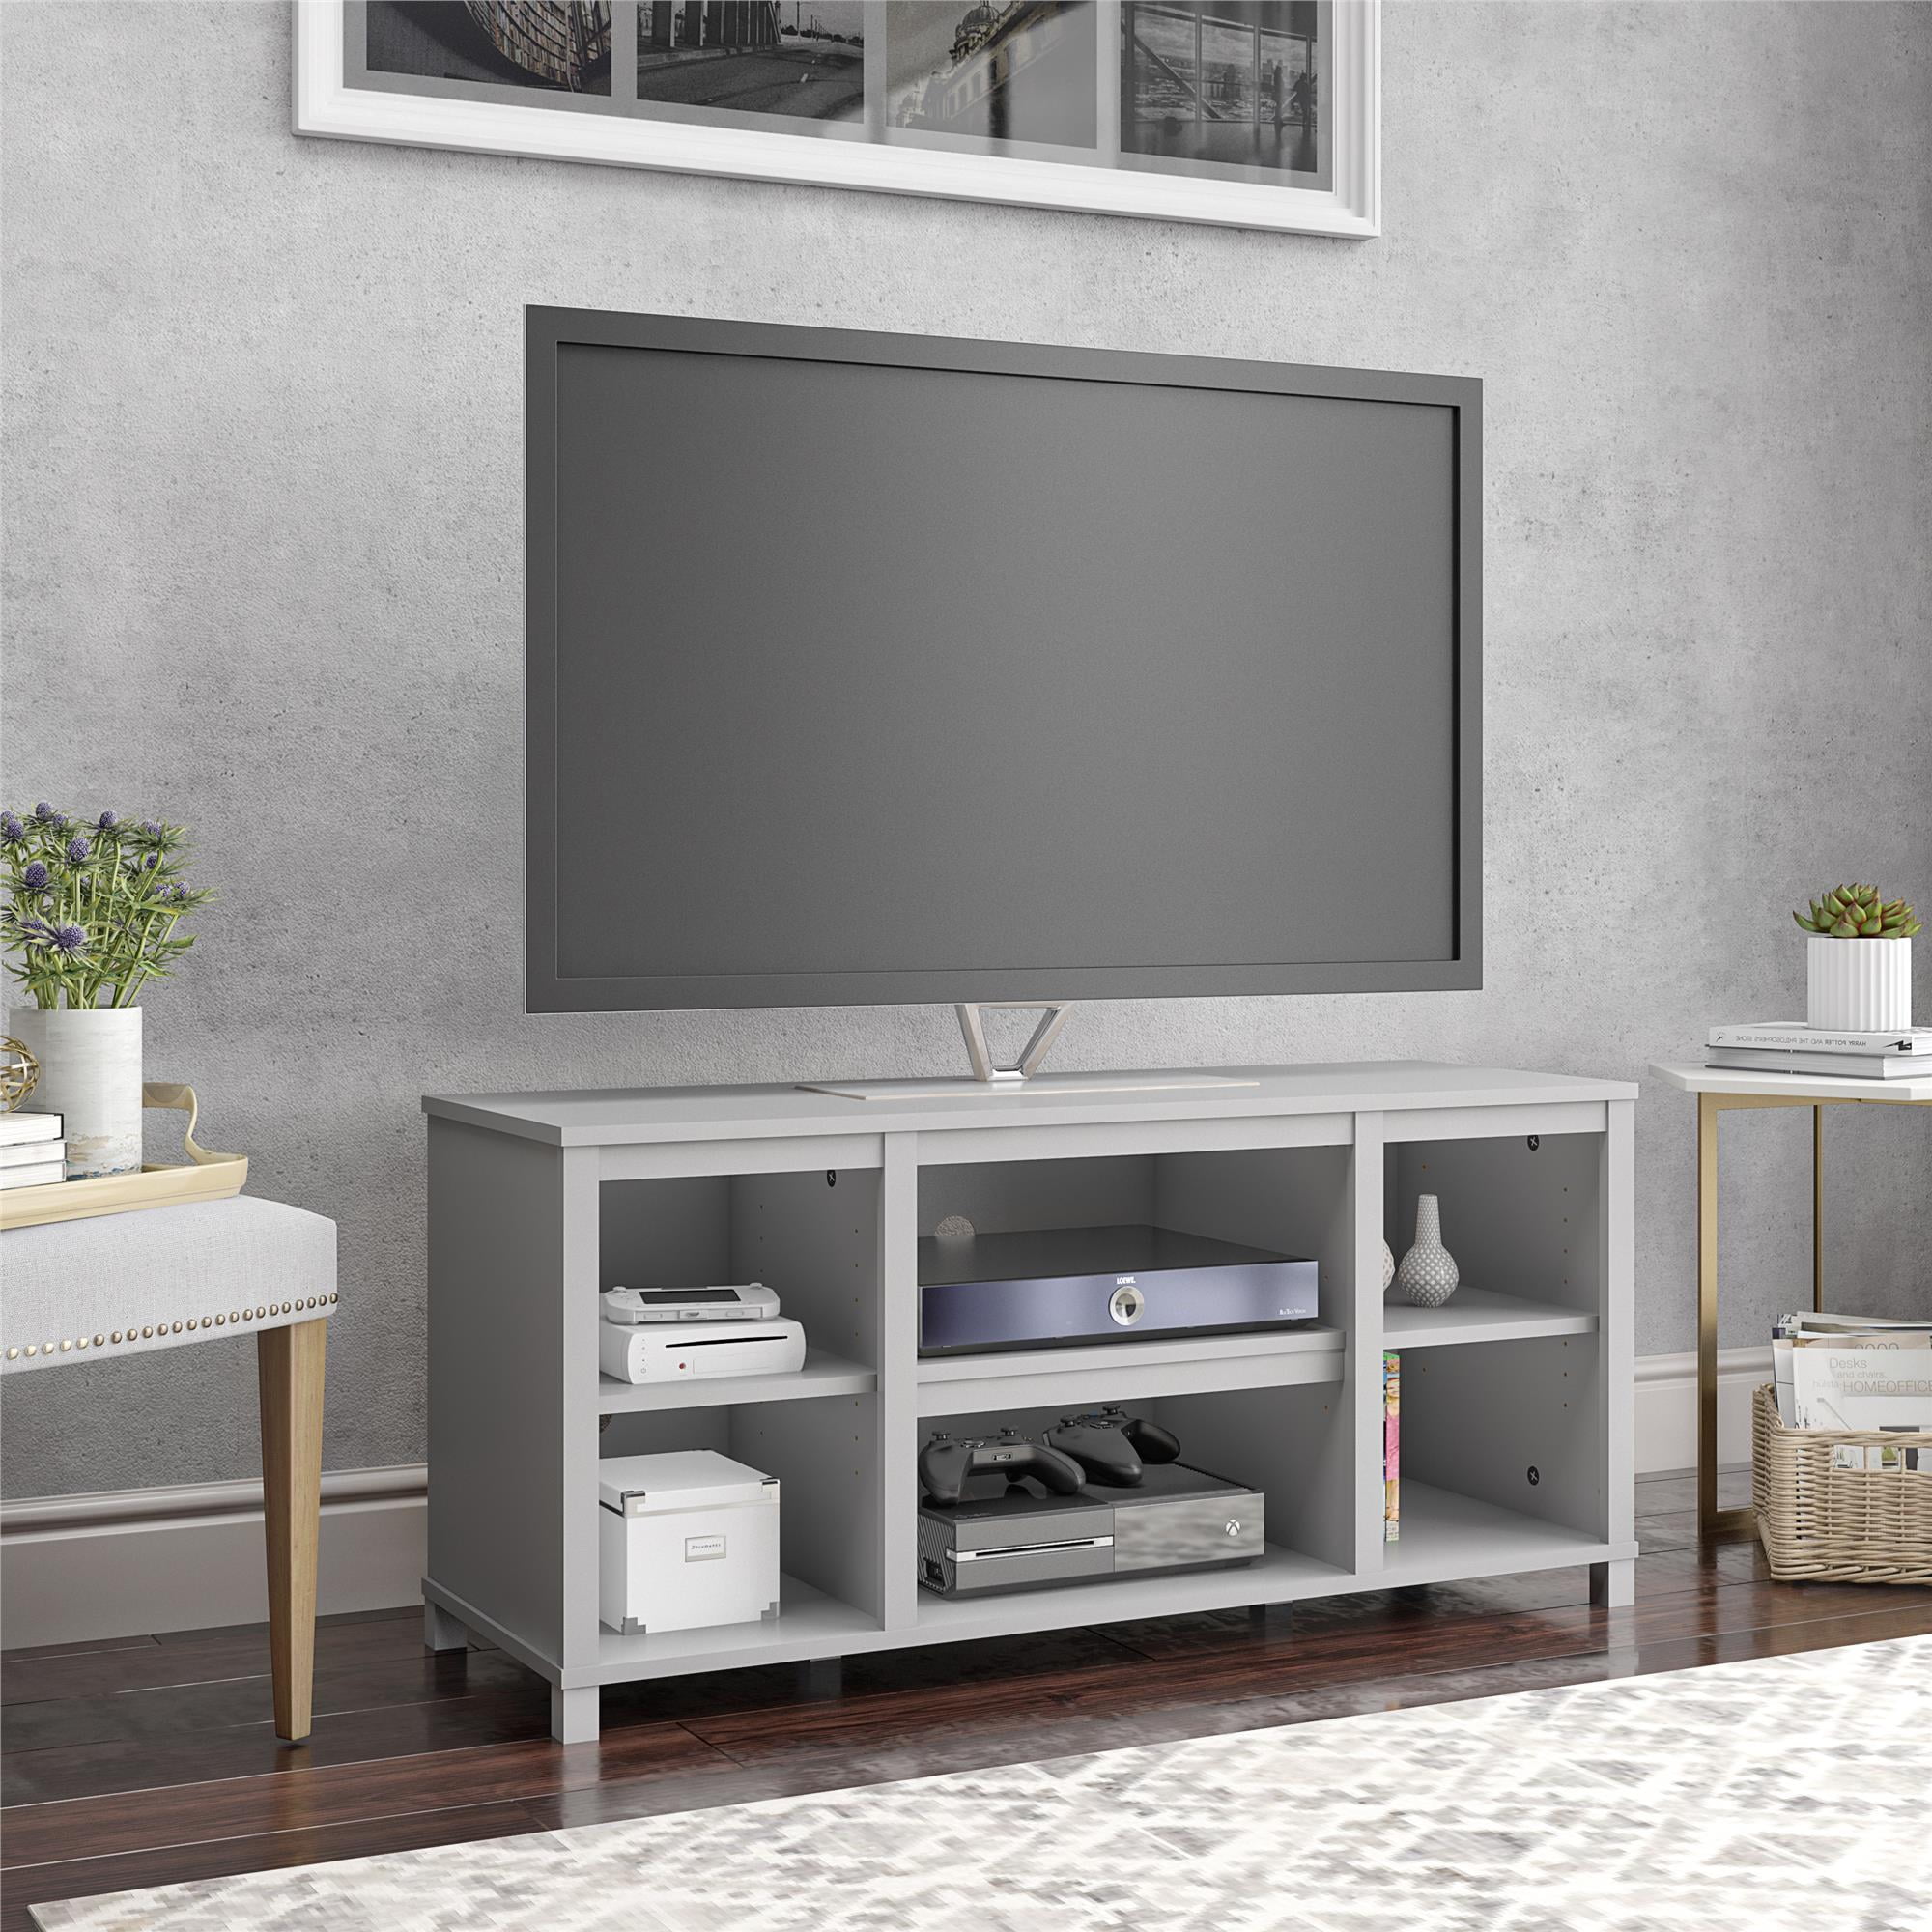 Parsons Cubby TV Stand Holds Up to 50 TV Mainstay. Black Oak, 45.39 x 15.75 x 20.87 Inches 